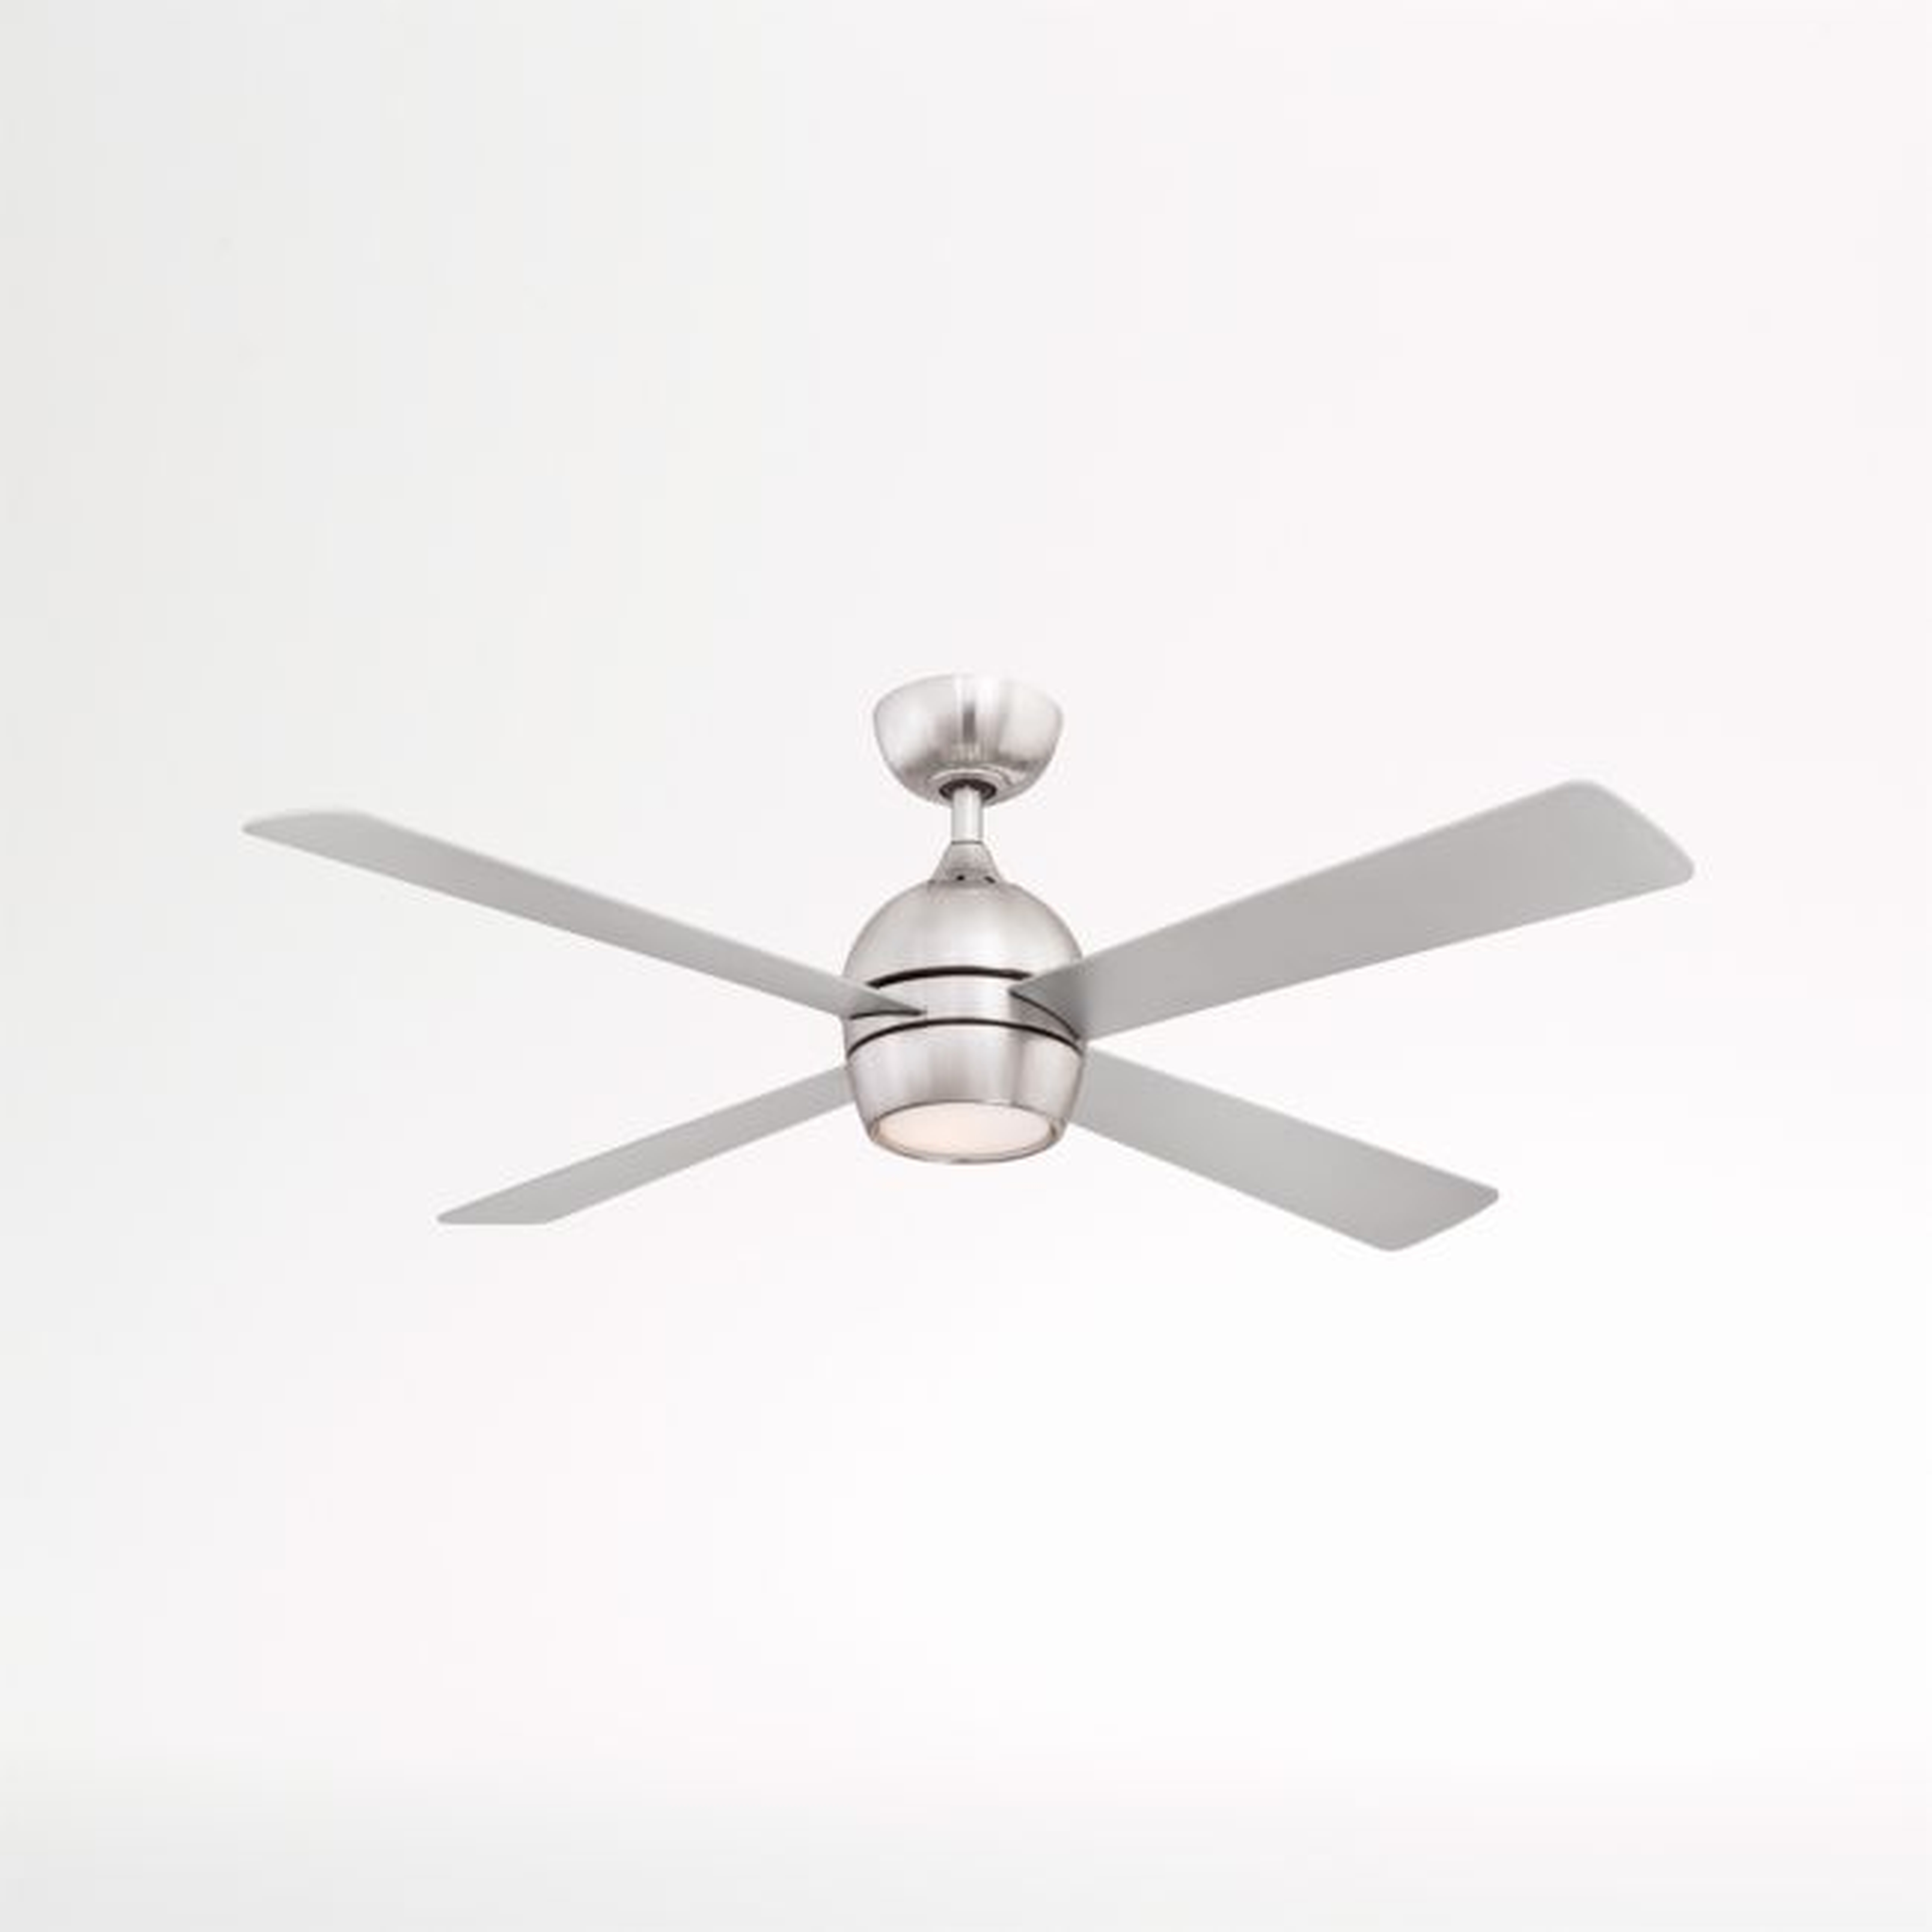 Fanimation Kwad 52" Brushed Nickel Ceiling Fan with LED light - Crate and Barrel